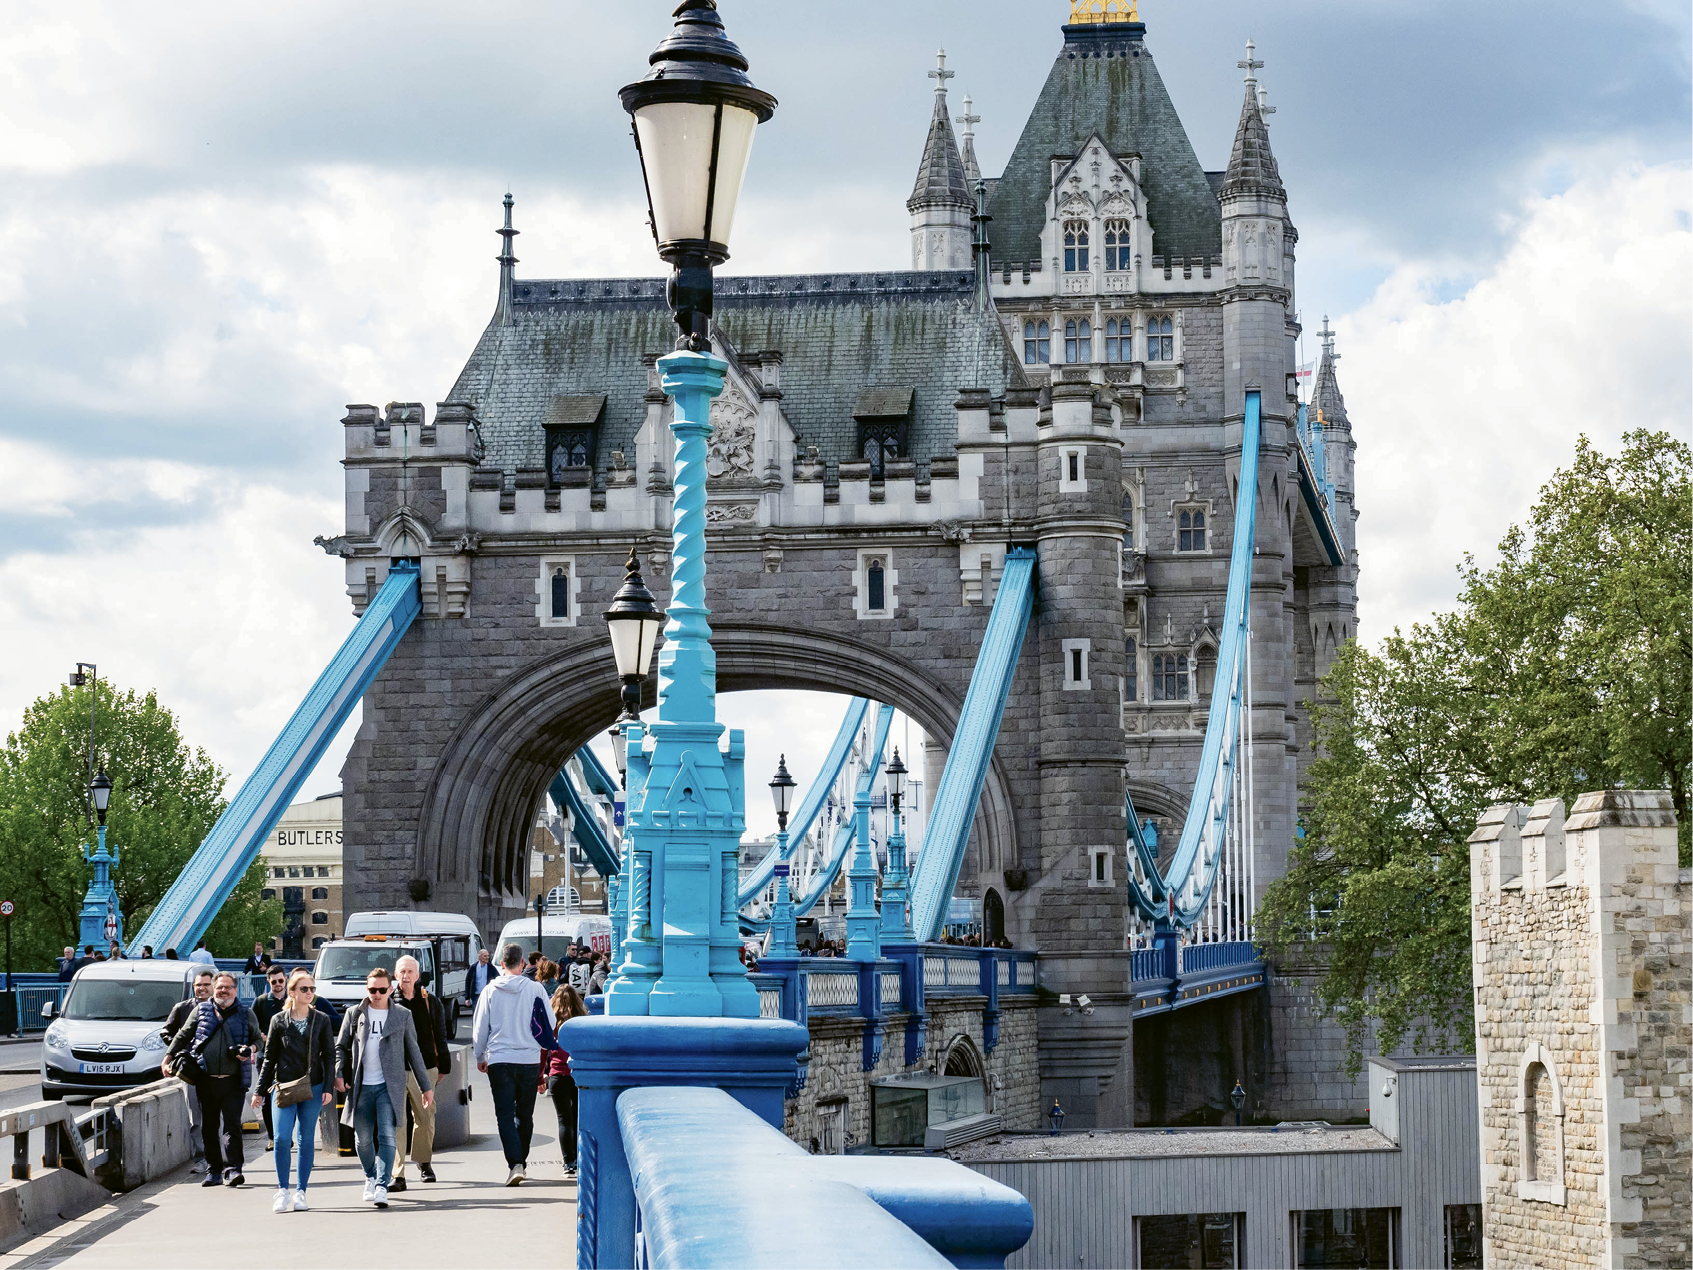 Following the River Thames, travelers can get close-up views of some of London’s iconic buildings, including the Tower Bridge...